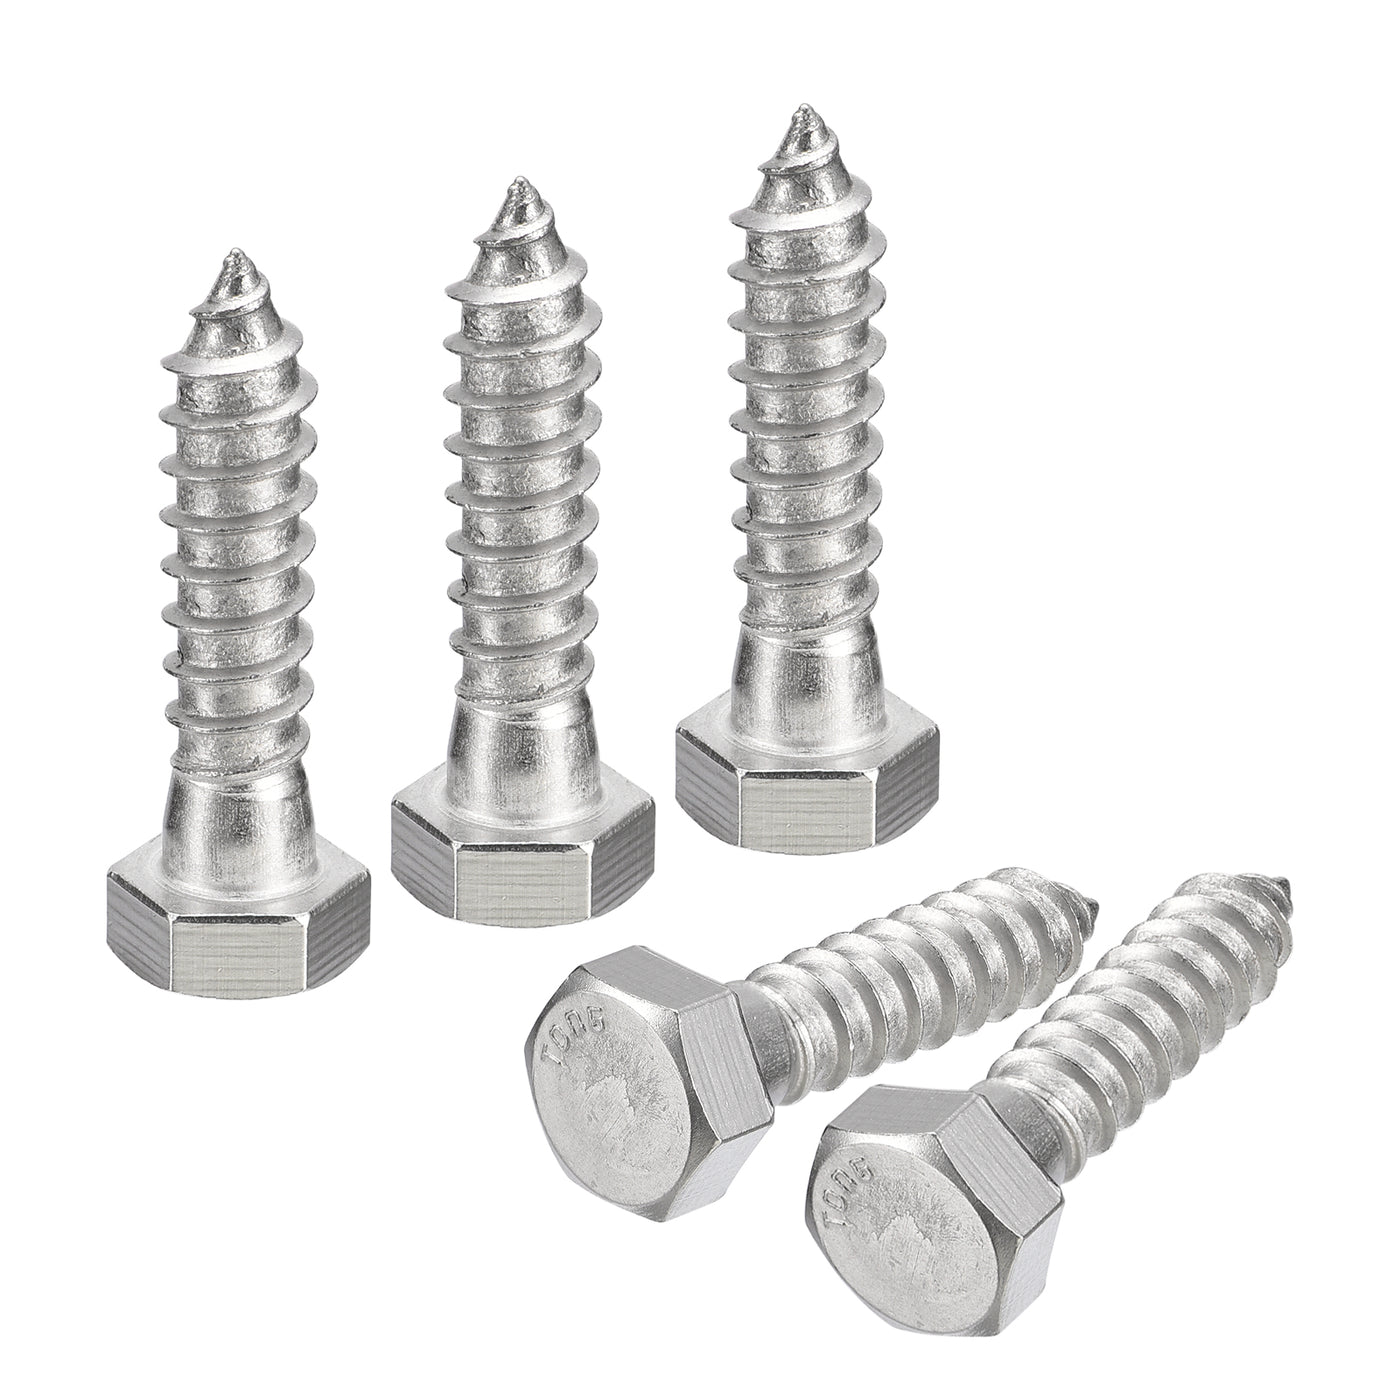 uxcell Uxcell Hex Head Lag Screws Bolts, 5pcs 1/2" x 2" 304 Stainless Steel Wood Screws